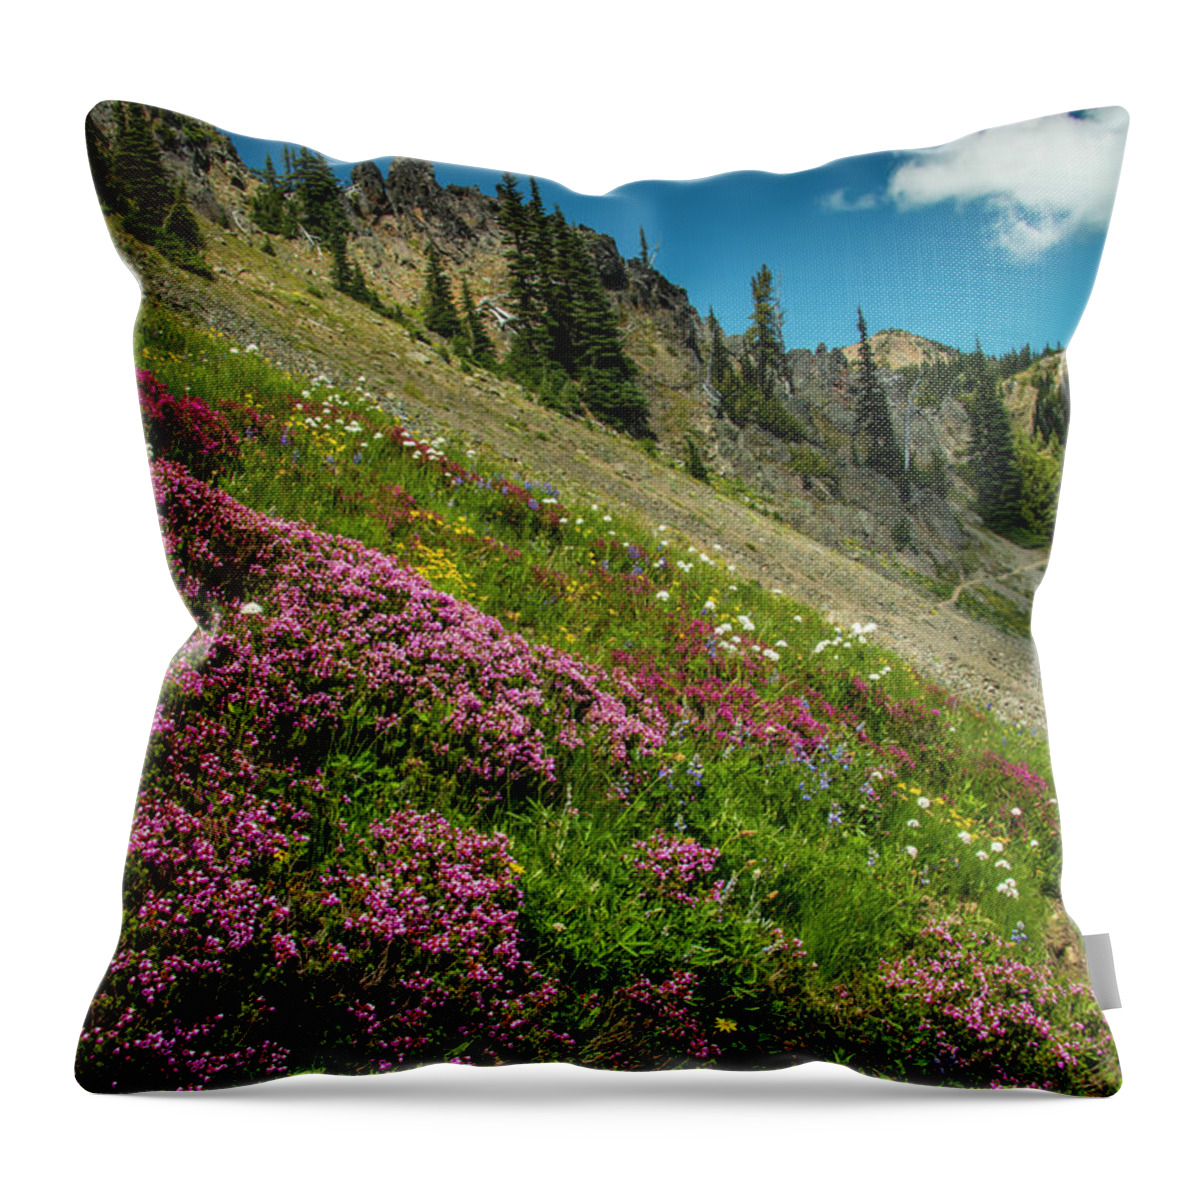 Pct Throw Pillow featuring the photograph Glorious Mountain Heather by Doug Scrima